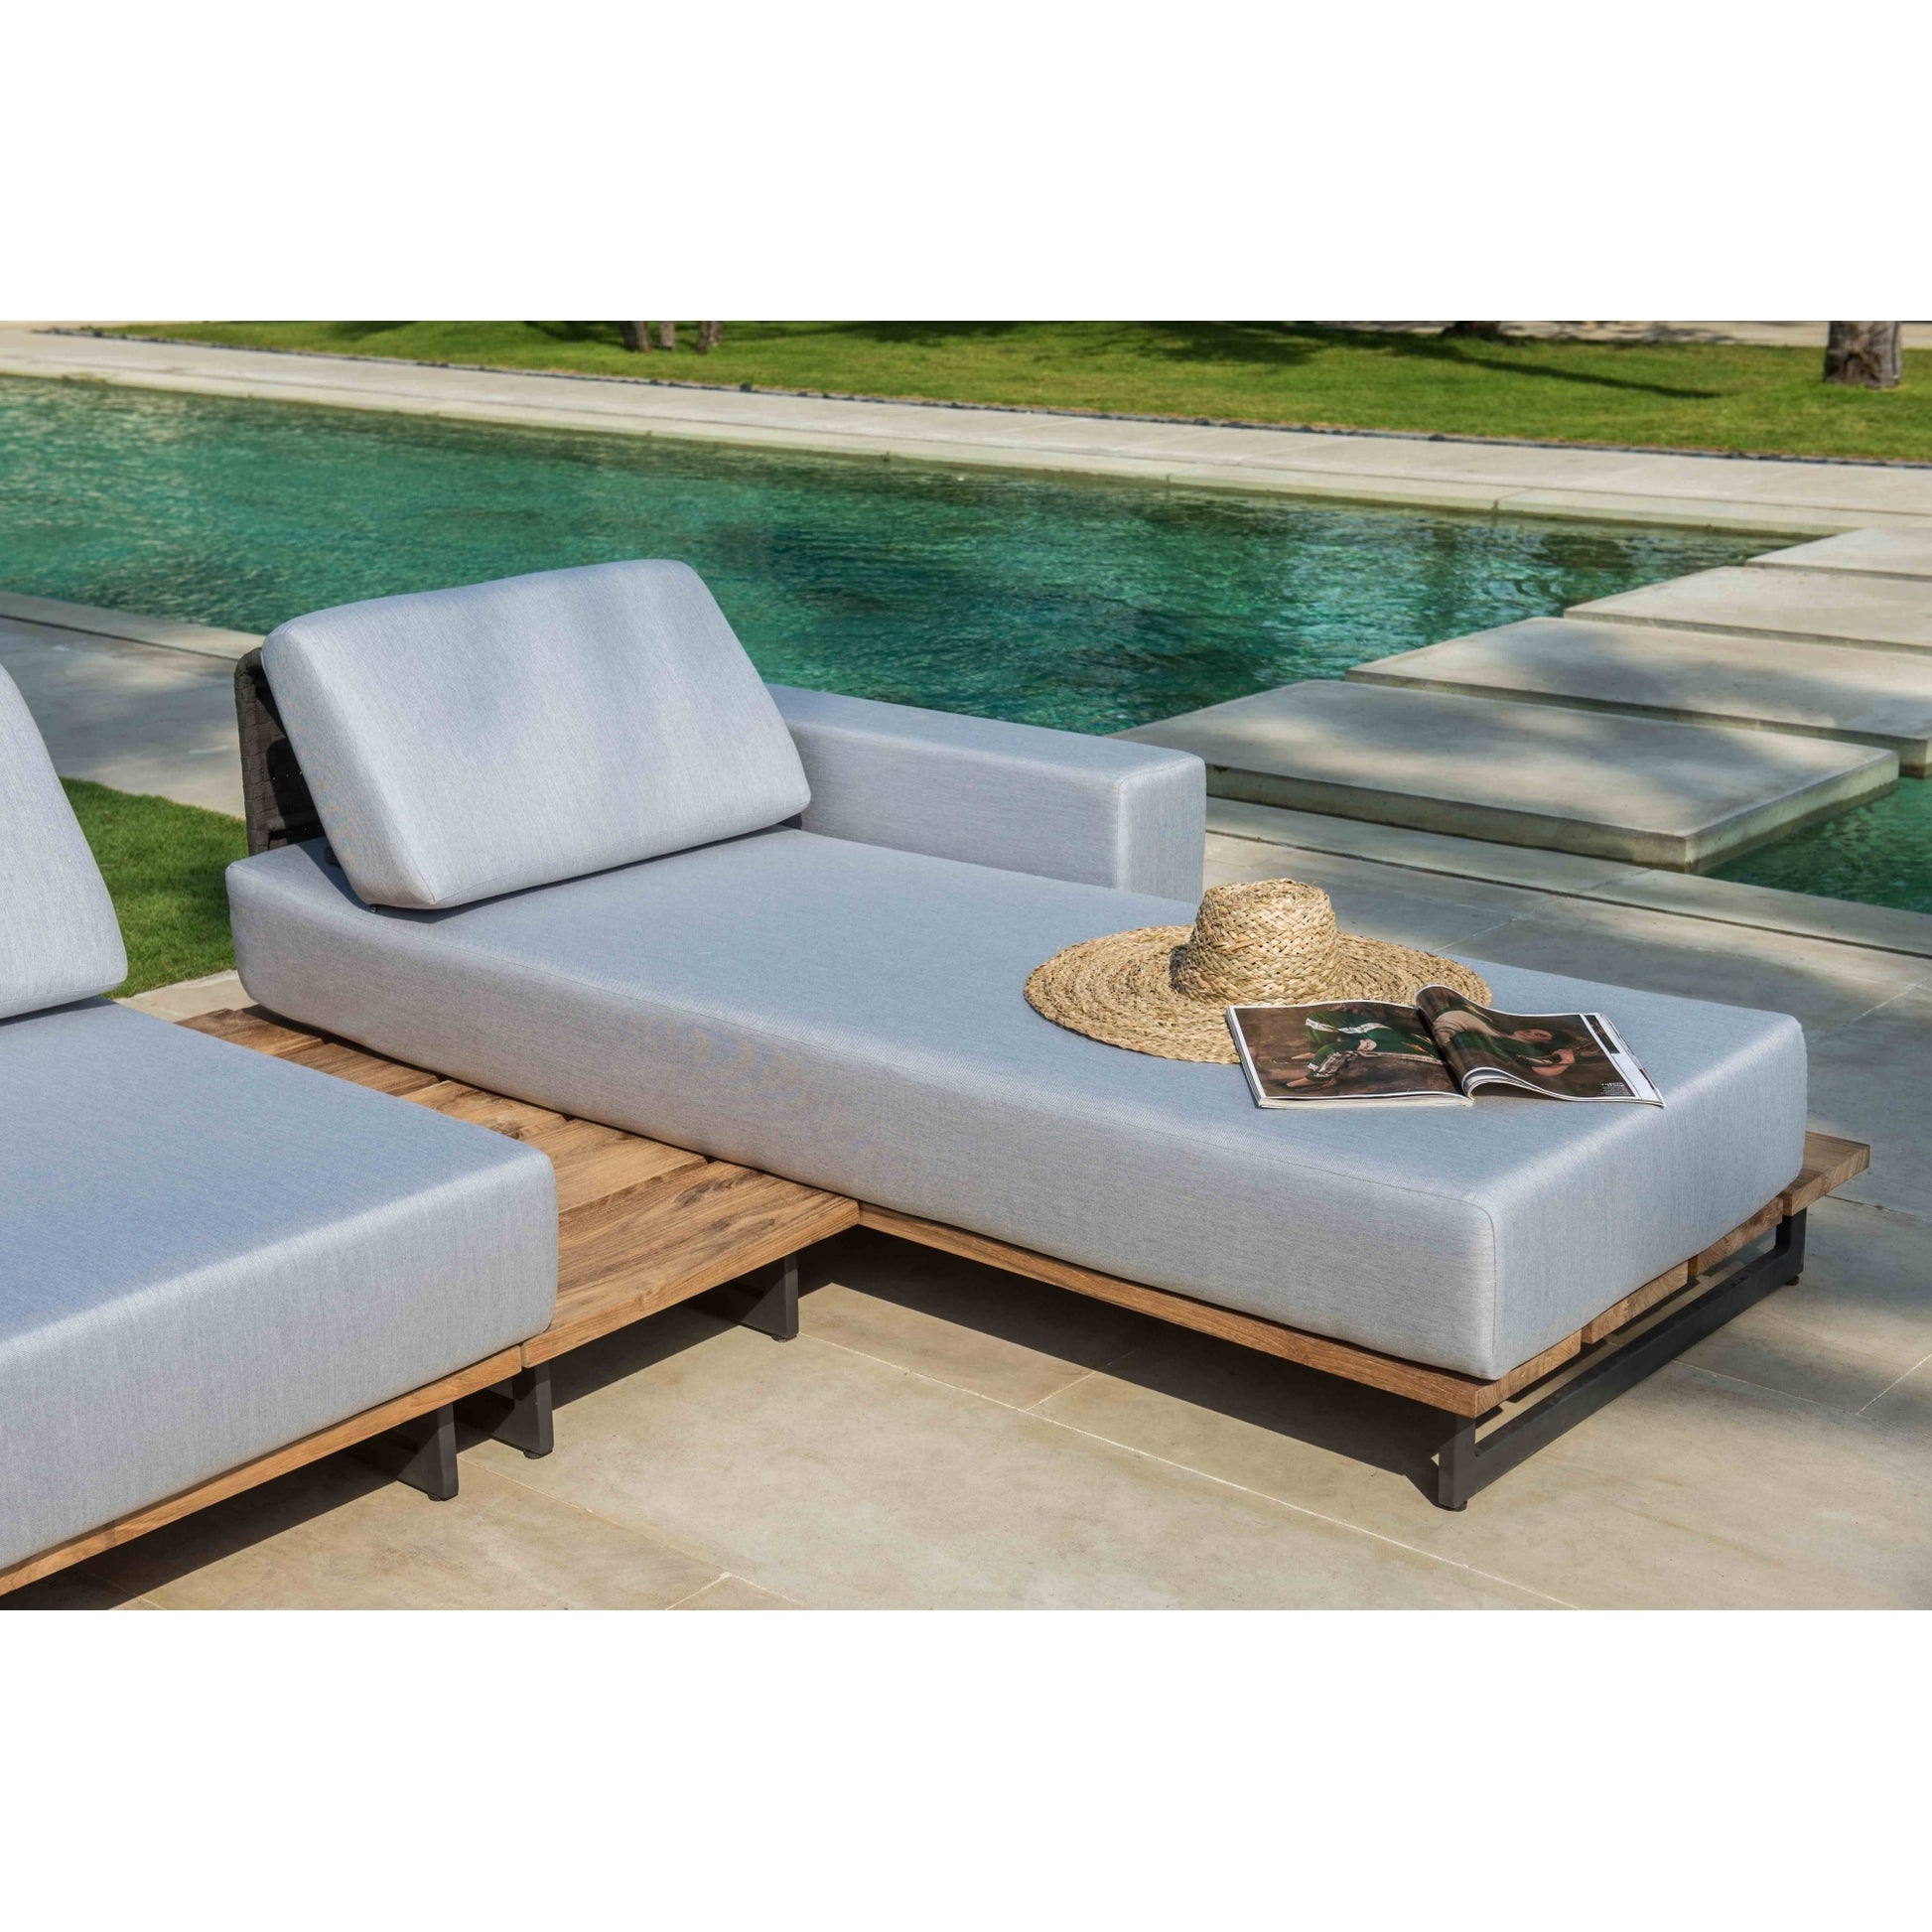 Ona Right Chaise - PadioLiving - Ona Right Chaise - Outdoor Chaise - PadioLiving